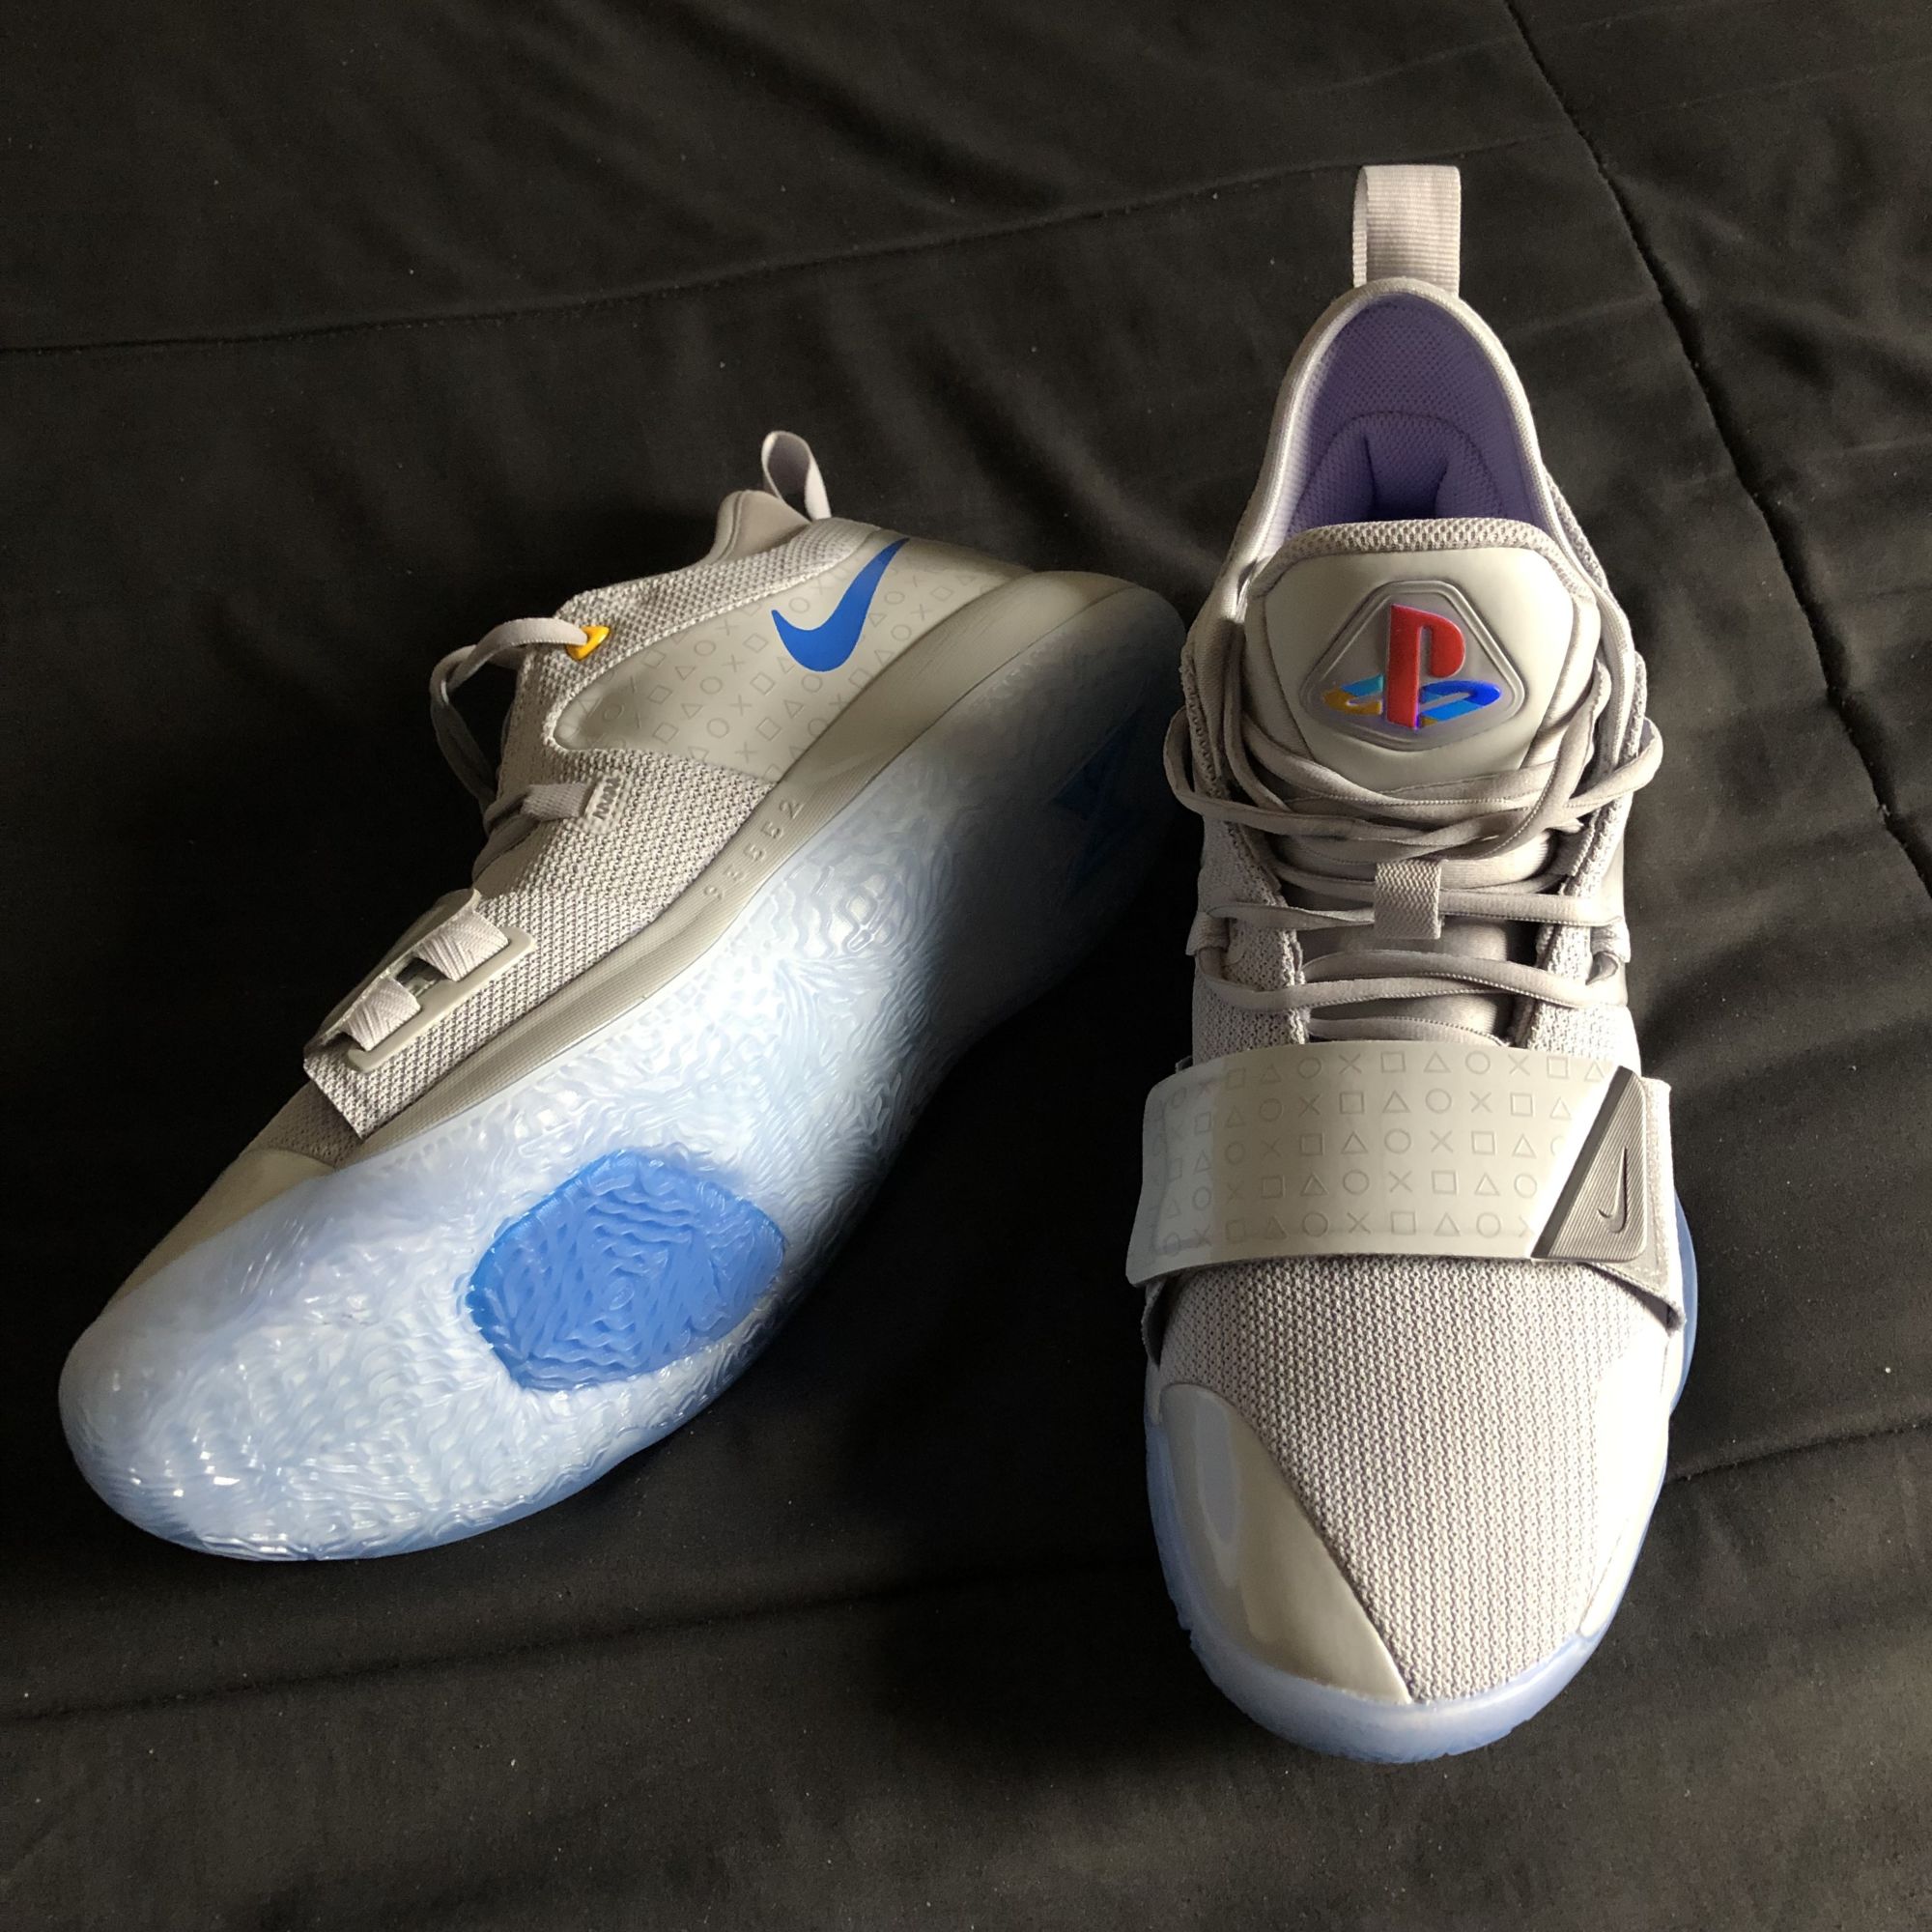 george paul playstation shoes